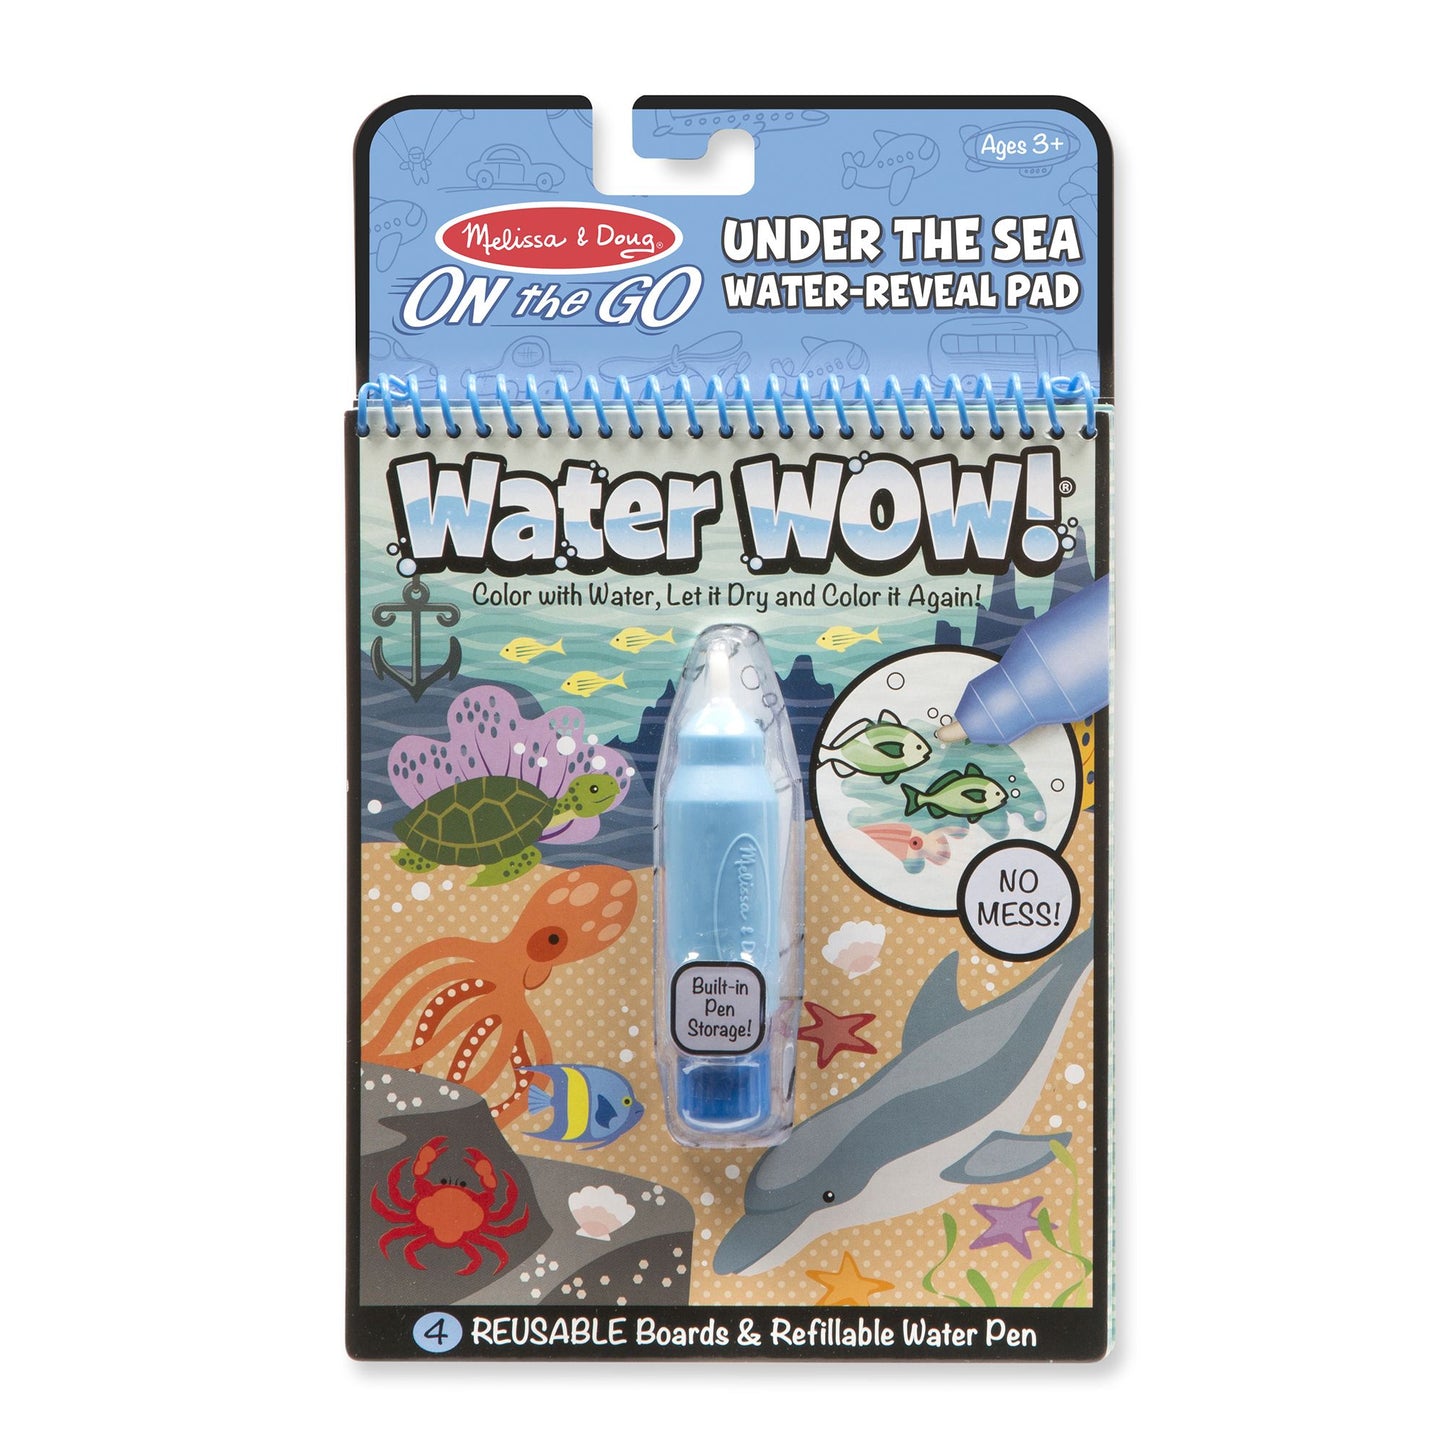 Melissa & Doug water wow Under the sea - All About Kids Odense